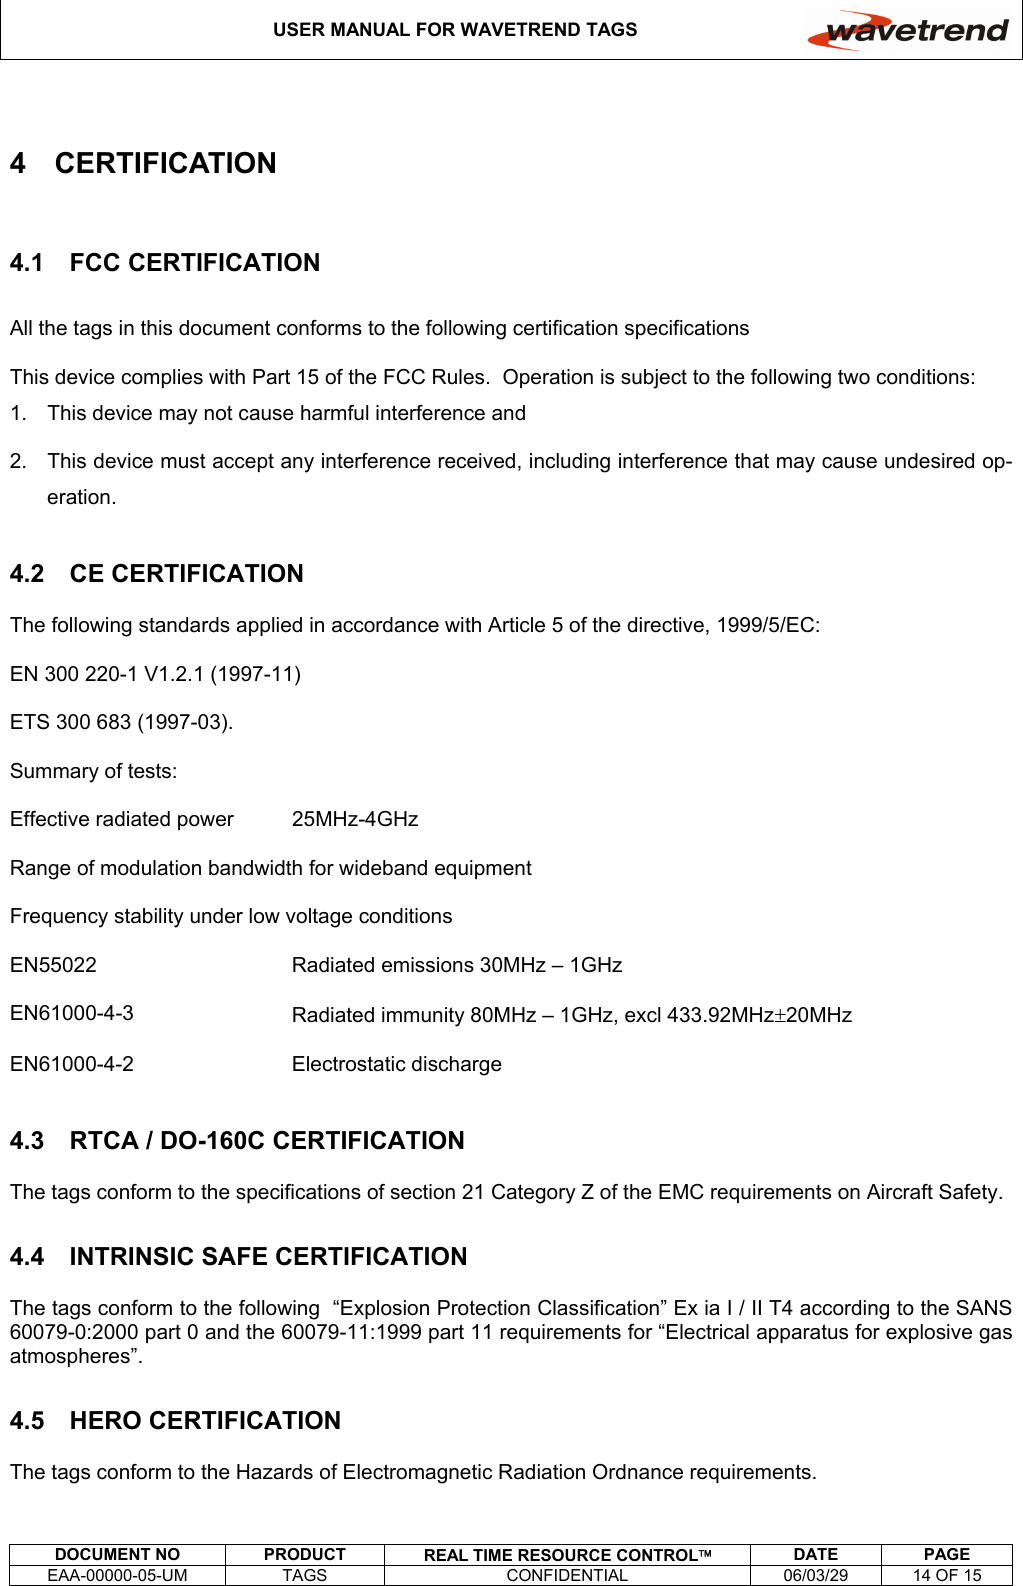 USER MANUAL FOR WAVETREND TAGS     DOCUMENT NO  PRODUCT  REAL TIME RESOURCE CONTROL DATE PAGE EAA-00000-05-UM  TAGS  CONFIDENTIAL  06/03/29  14 OF 15  4 CERTIFICATION 4.1 FCC CERTIFICATION All the tags in this document conforms to the following certification specifications This device complies with Part 15 of the FCC Rules.  Operation is subject to the following two conditions: 1.  This device may not cause harmful interference and 2.  This device must accept any interference received, including interference that may cause undesired op-eration. 4.2 CE CERTIFICATION The following standards applied in accordance with Article 5 of the directive, 1999/5/EC: EN 300 220-1 V1.2.1 (1997-11) ETS 300 683 (1997-03). Summary of tests: Effective radiated power  25MHz-4GHz Range of modulation bandwidth for wideband equipment Frequency stability under low voltage conditions EN55022  Radiated emissions 30MHz – 1GHz EN61000-4-3  Radiated immunity 80MHz – 1GHz, excl 433.92MHz±20MHz EN61000-4-2 Electrostatic discharge 4.3  RTCA / DO-160C CERTIFICATION The tags conform to the specifications of section 21 Category Z of the EMC requirements on Aircraft Safety. 4.4  INTRINSIC SAFE CERTIFICATION The tags conform to the following  “Explosion Protection Classification” Ex ia I / II T4 according to the SANS 60079-0:2000 part 0 and the 60079-11:1999 part 11 requirements for “Electrical apparatus for explosive gas atmospheres”. 4.5 HERO CERTIFICATION The tags conform to the Hazards of Electromagnetic Radiation Ordnance requirements. 